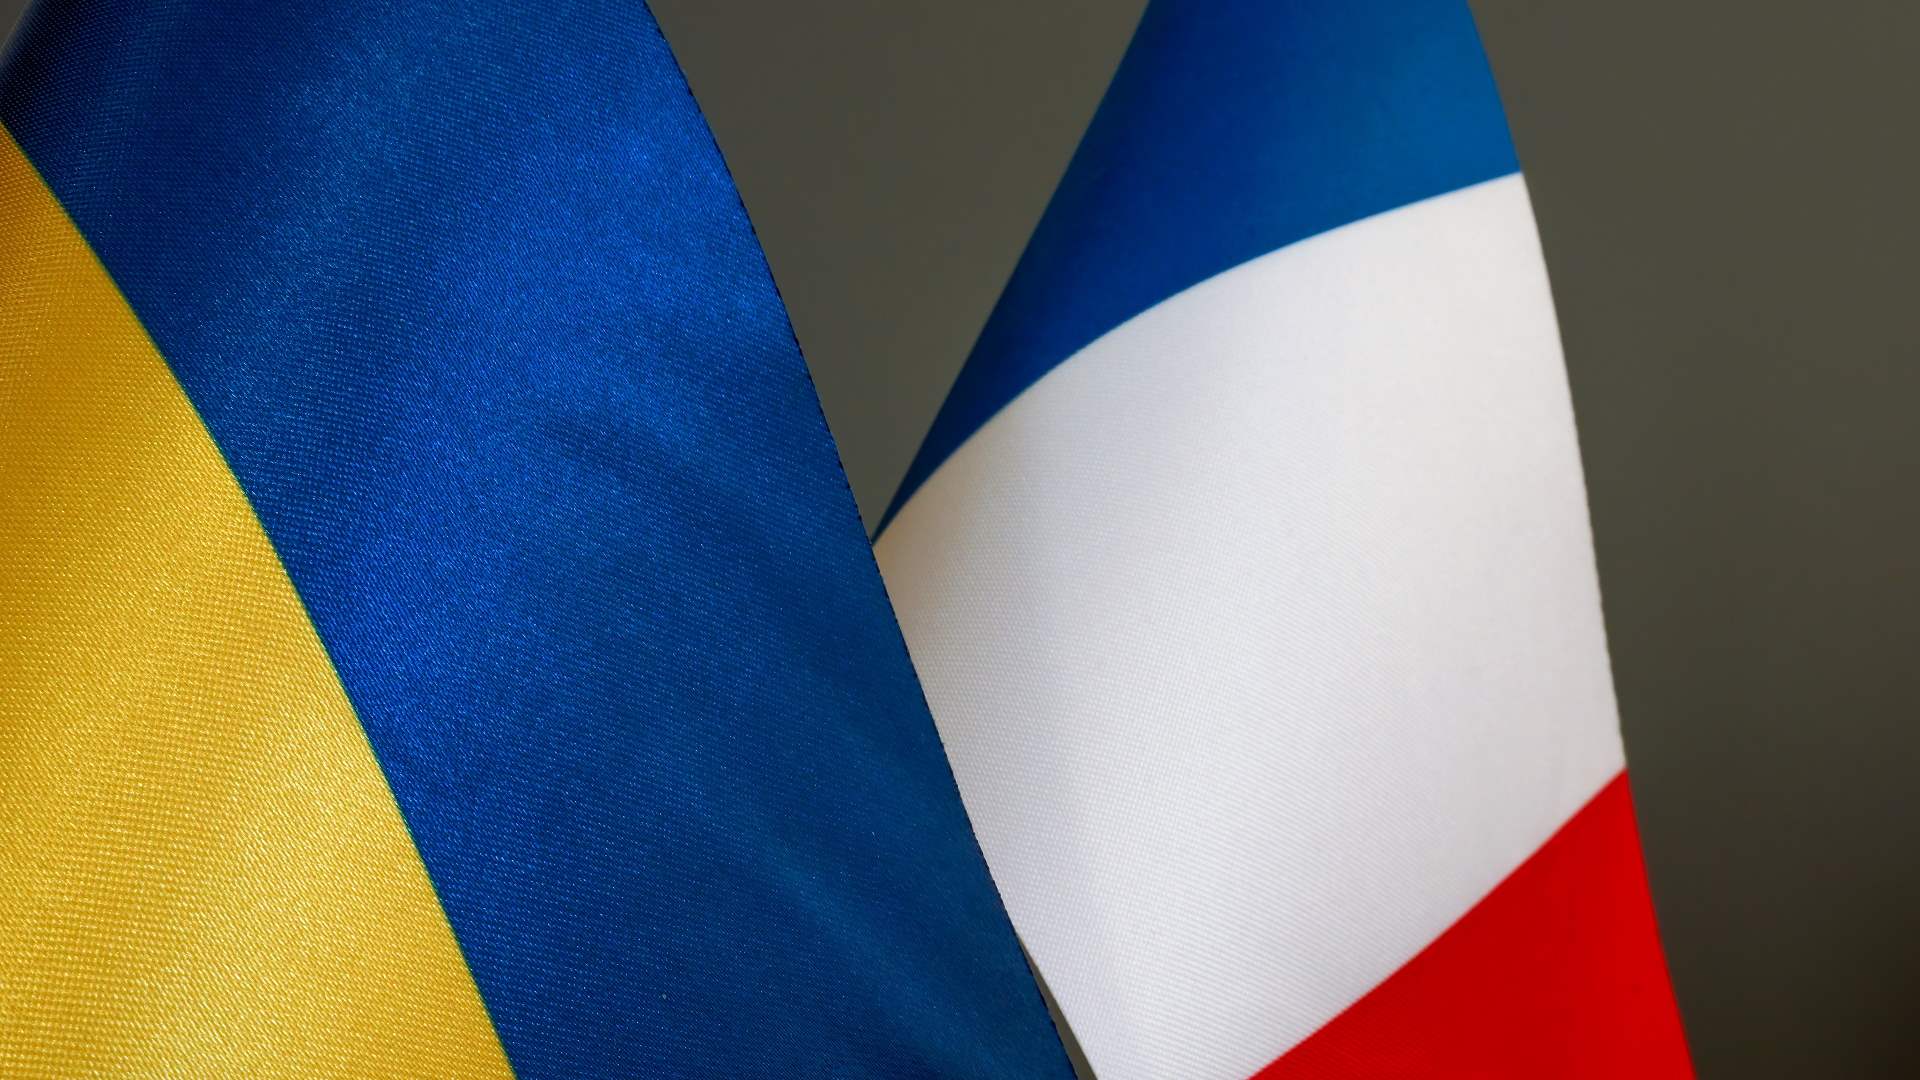 France condemns vote in Ukrainian regions occupied by Russia